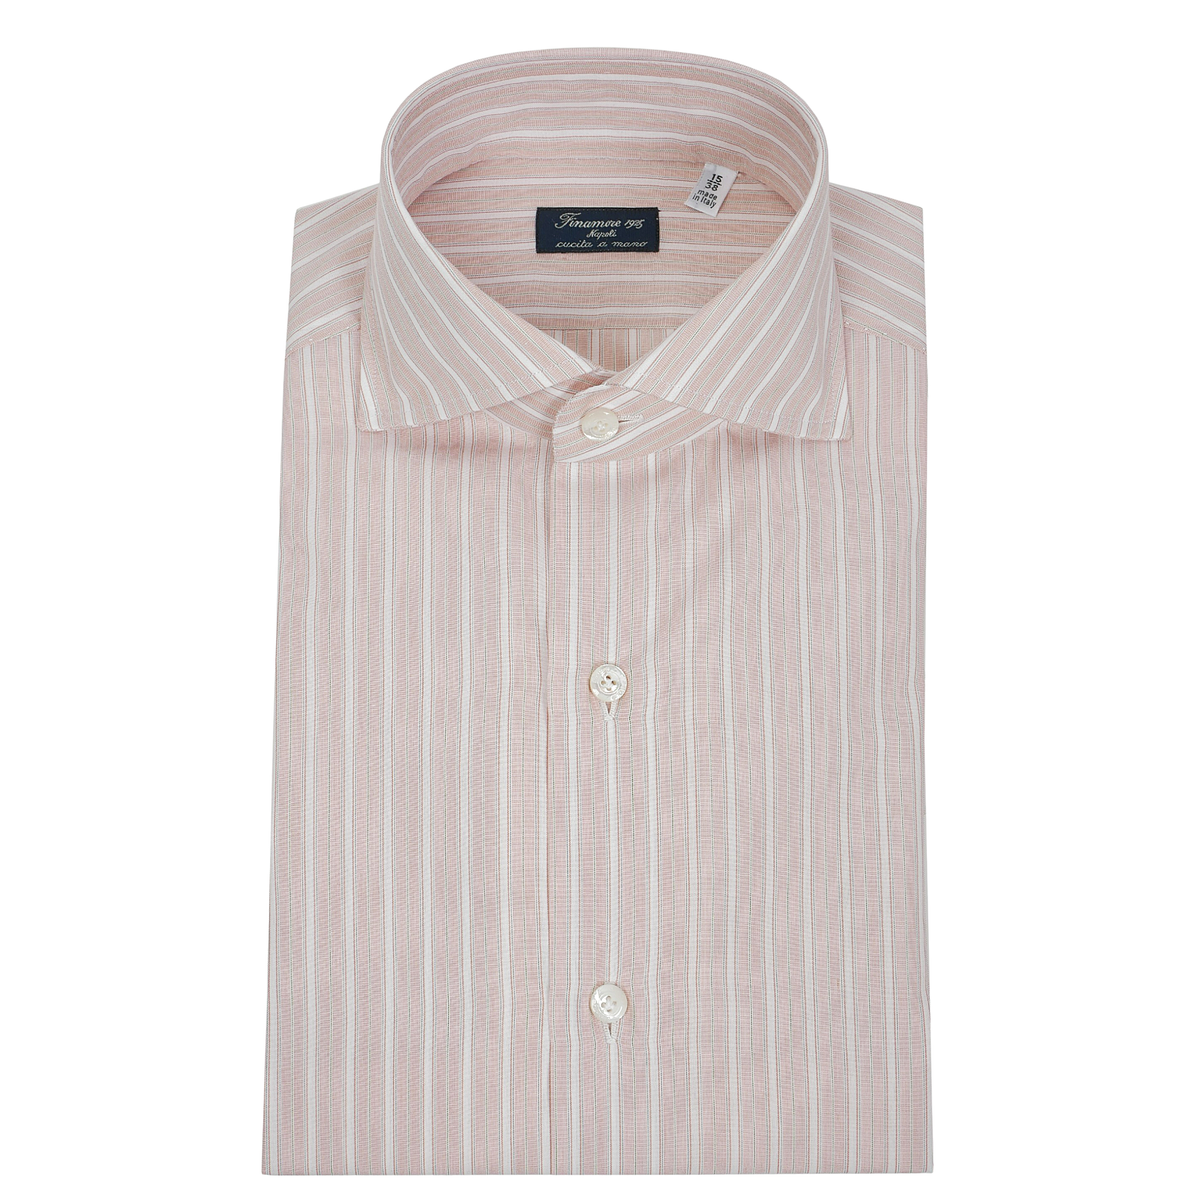 Napoli classic shirt in cotton with two light pink poplin voile